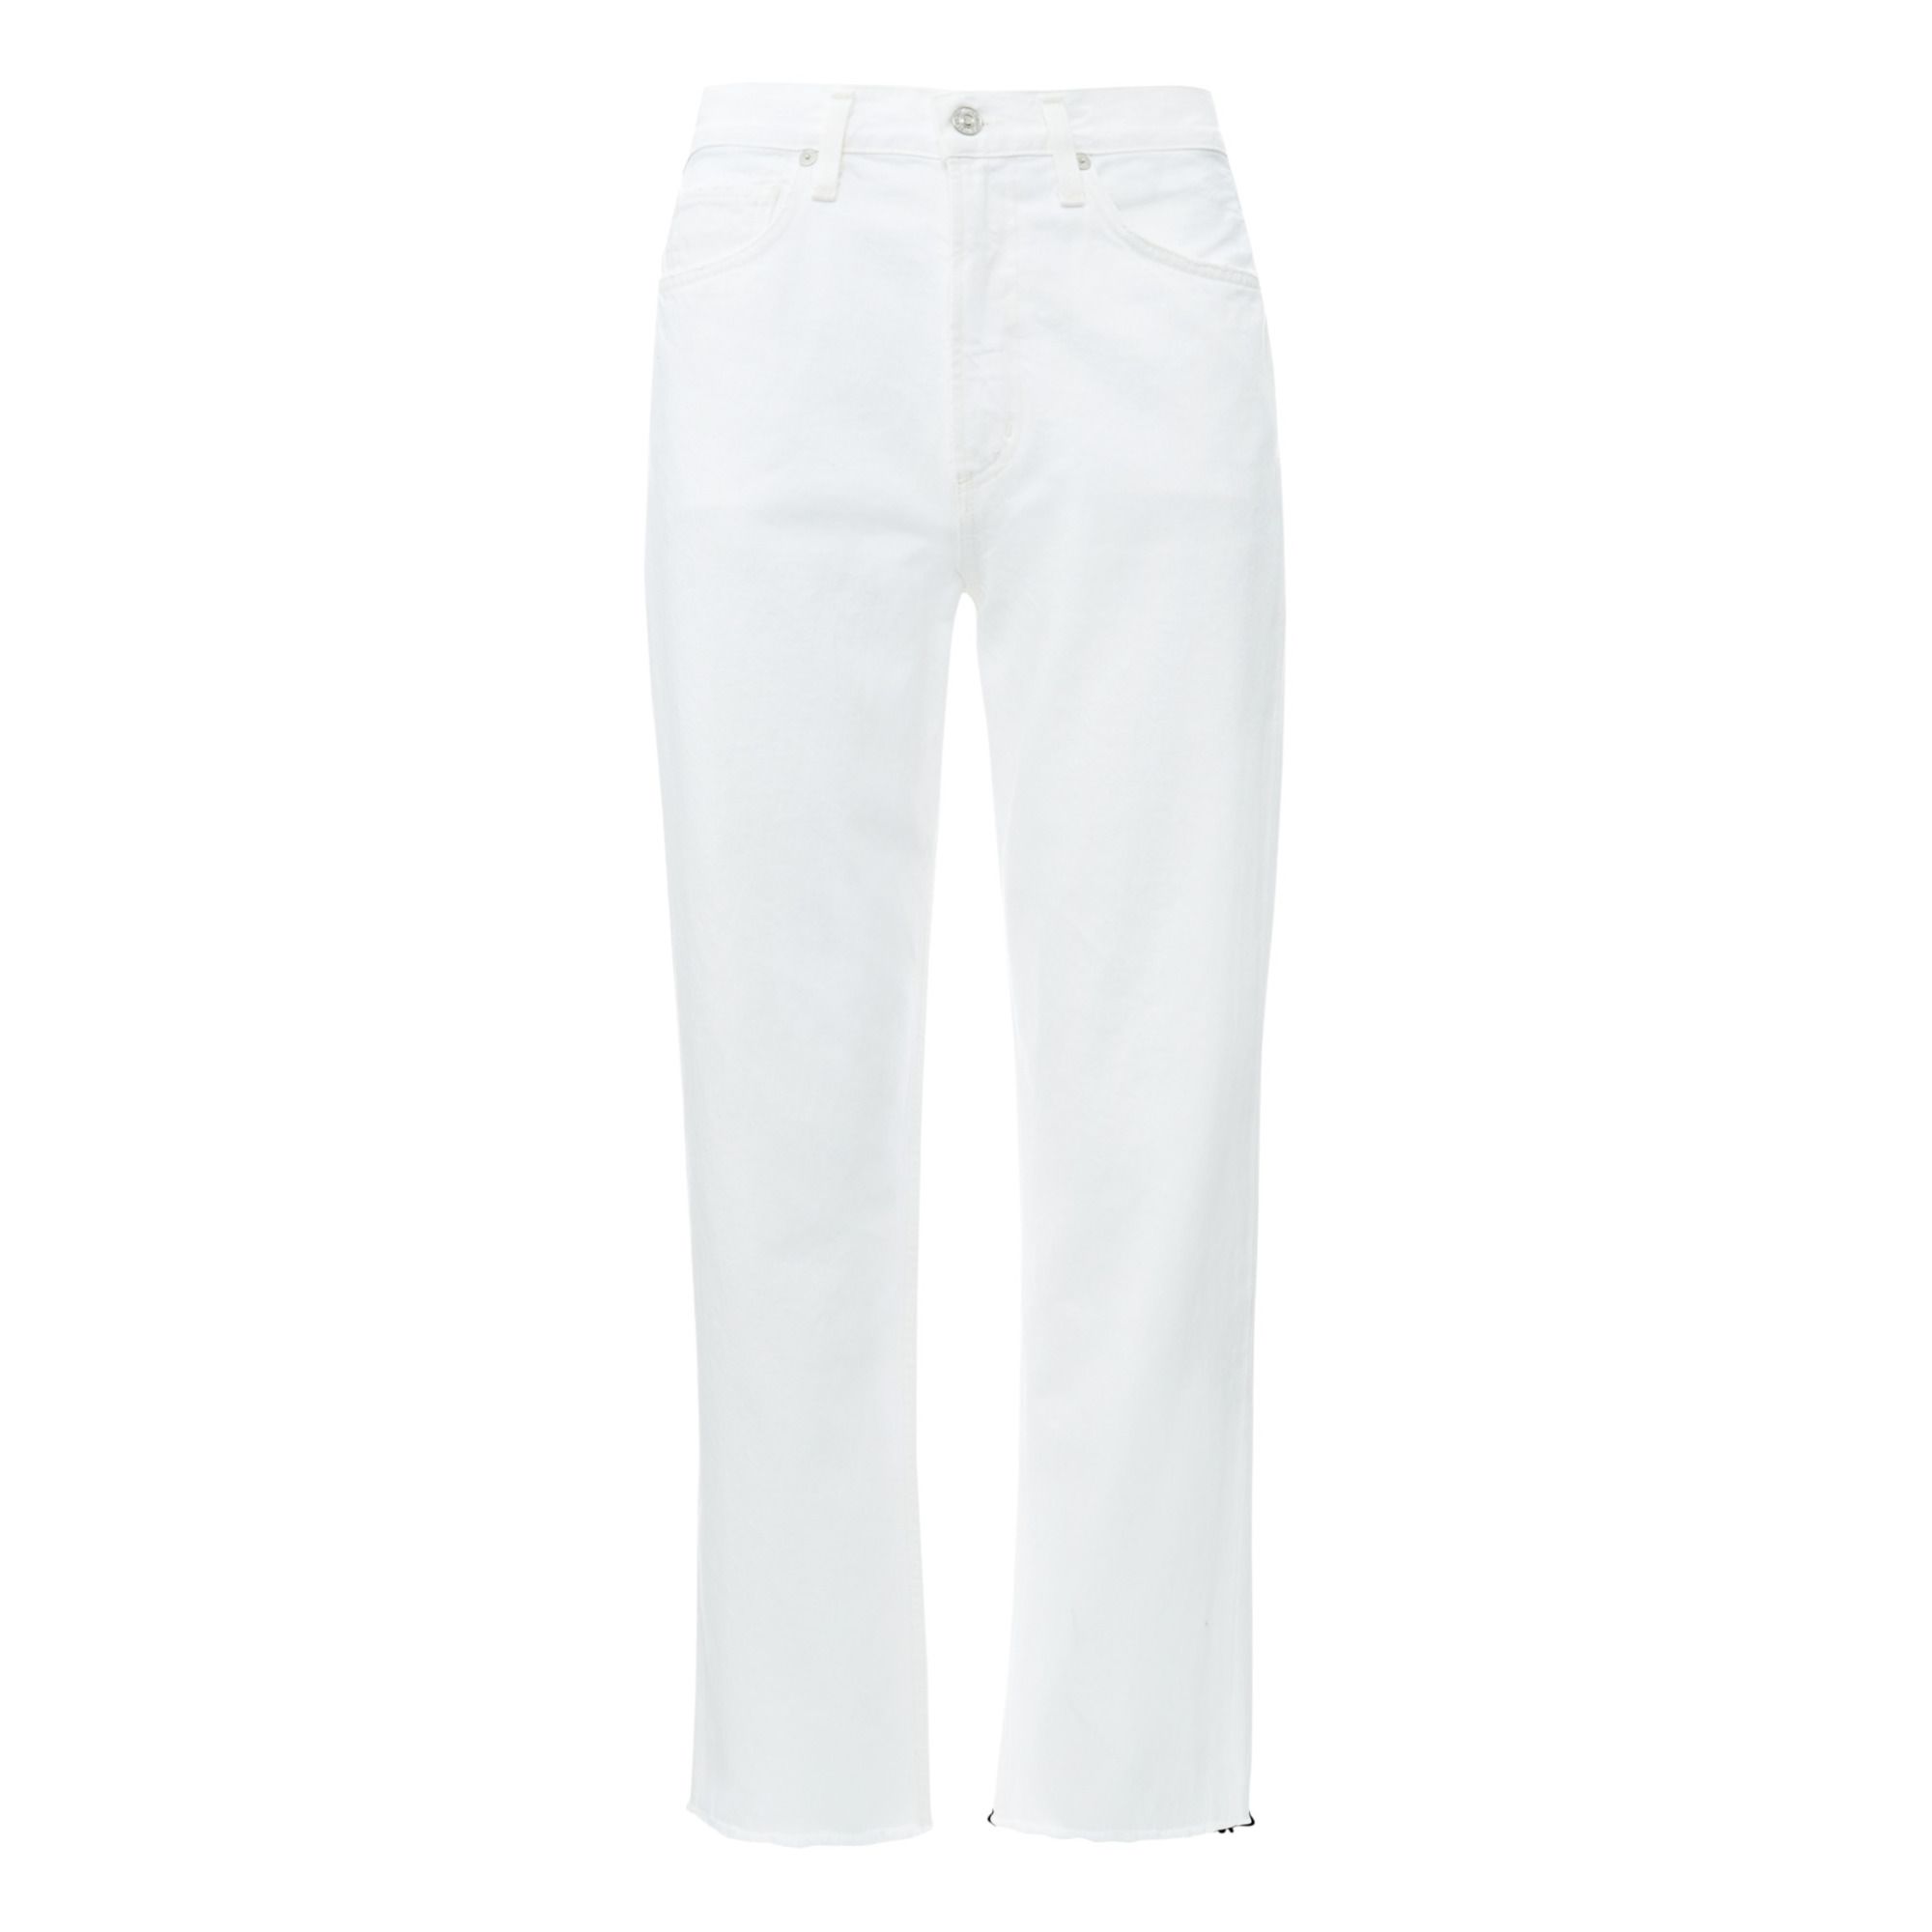 Citizens of Humanity - Jean Crop Daphne - Femme - Sail